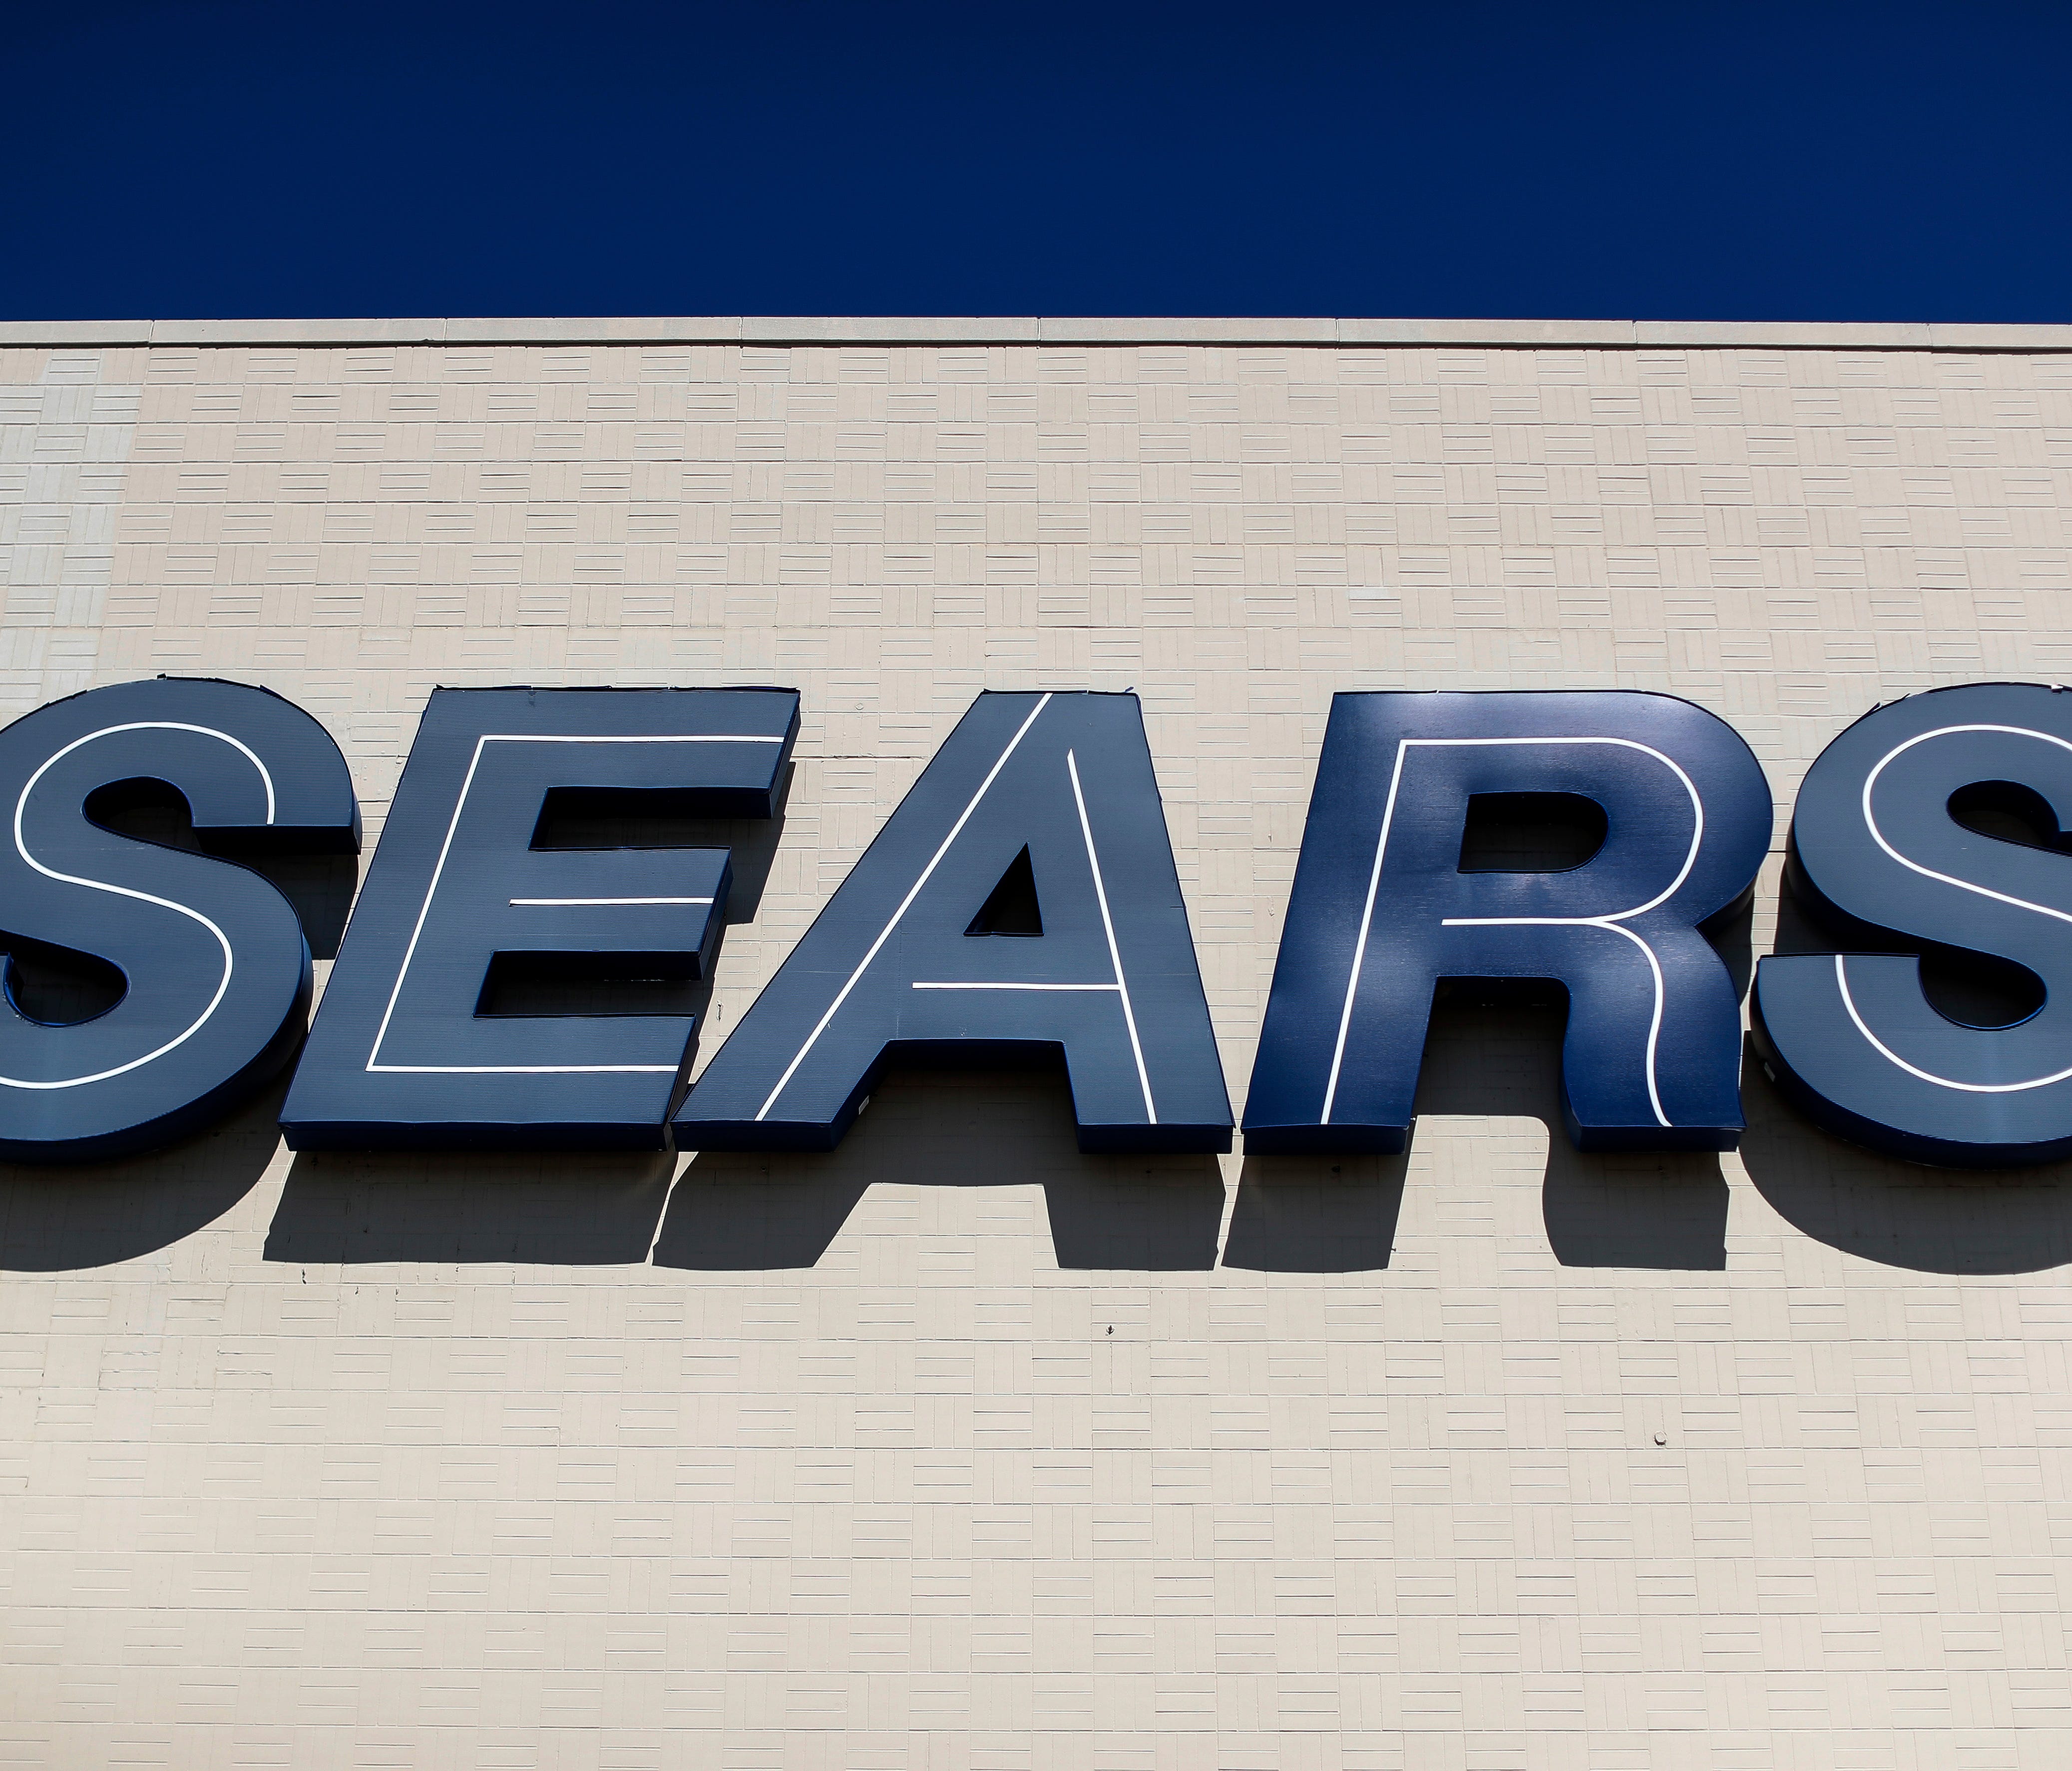 File photo taken in 2017 shows a Sears sign outside the retailer's department store at the Tri-County Mall, in Springdale, Ohio.